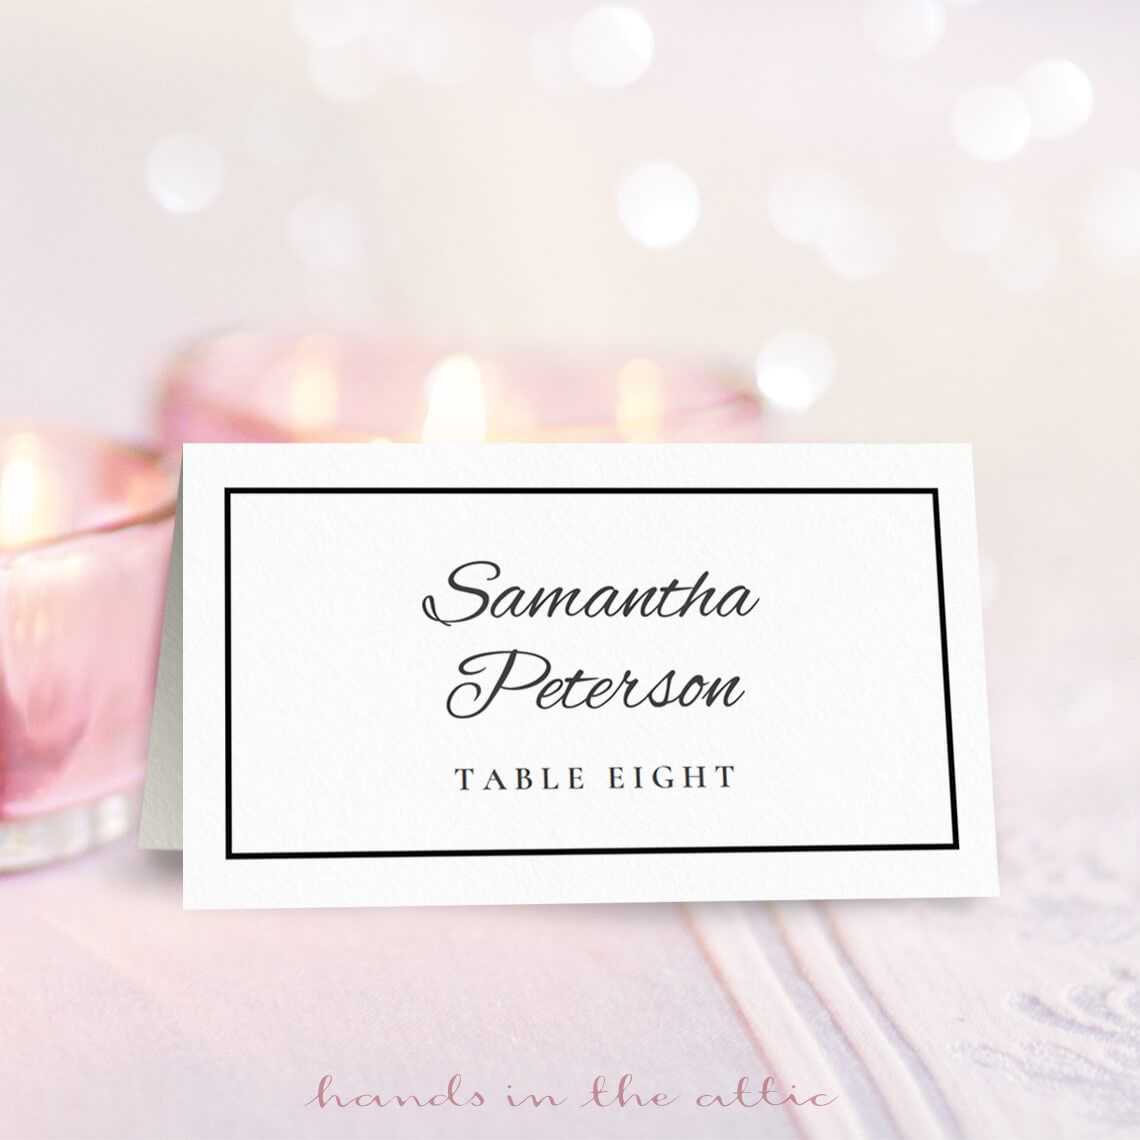 8 Free Wedding Place Card Templates Regarding Table Reservation Card Template